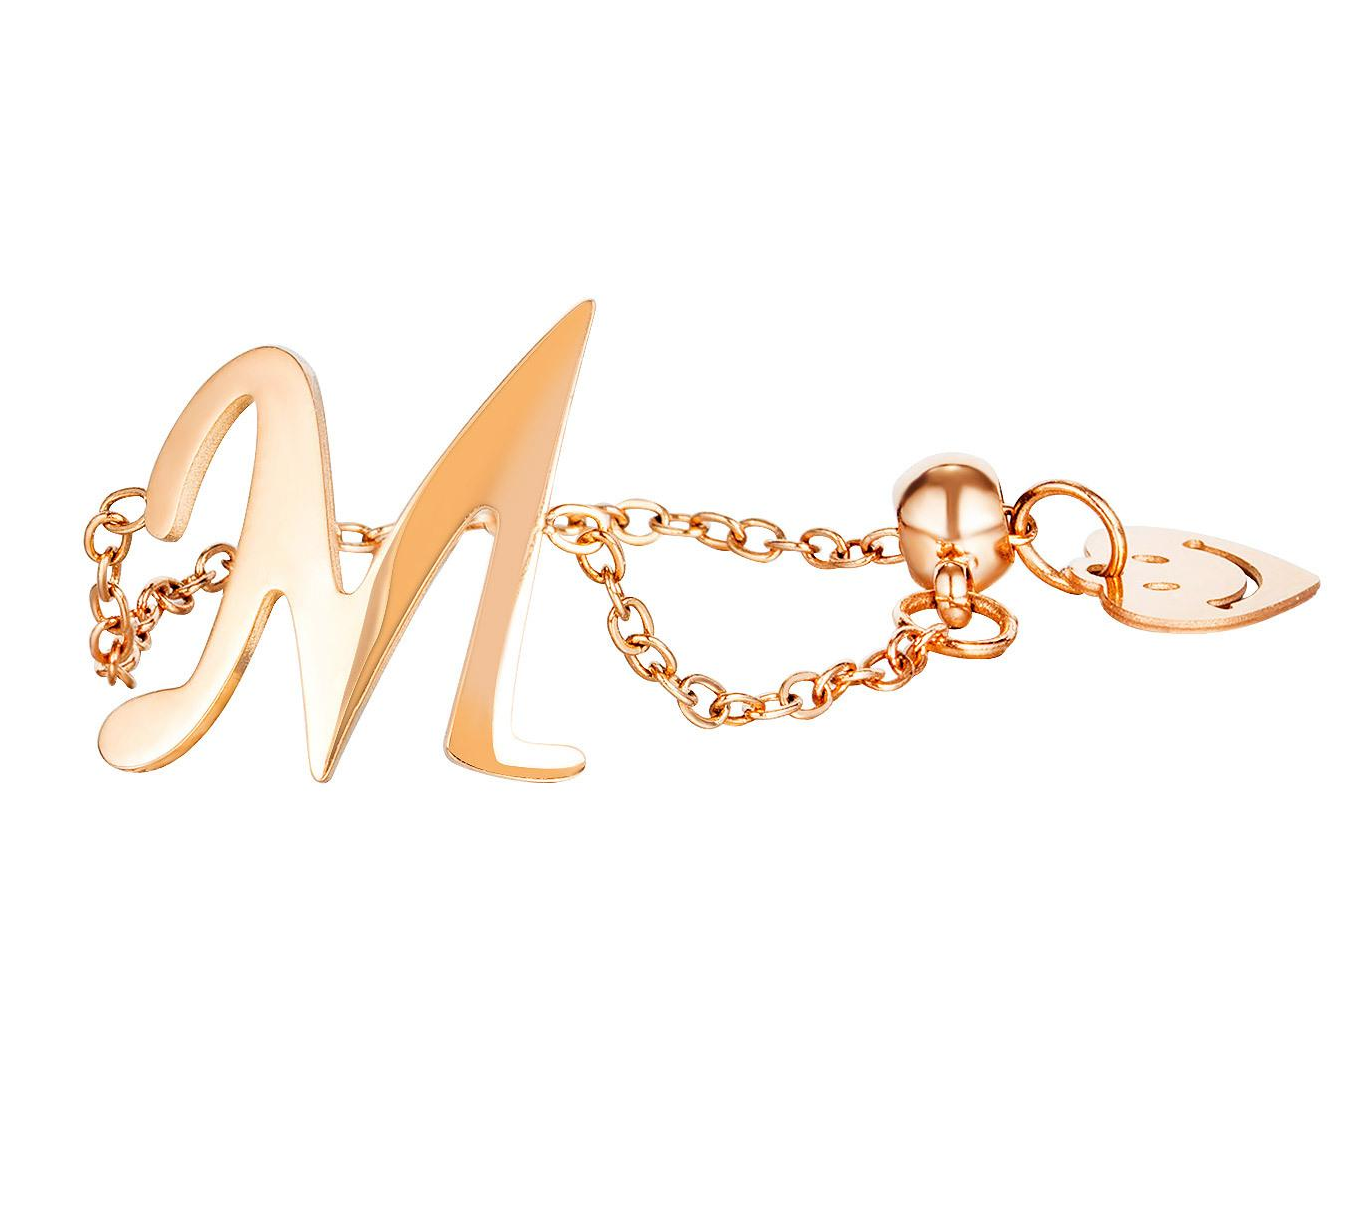 New arrival LetterM K Gold Plated Stainless Steel Chain Rings Fashion Beautyt Gift Jewelry Wholesale AG JEWELRY